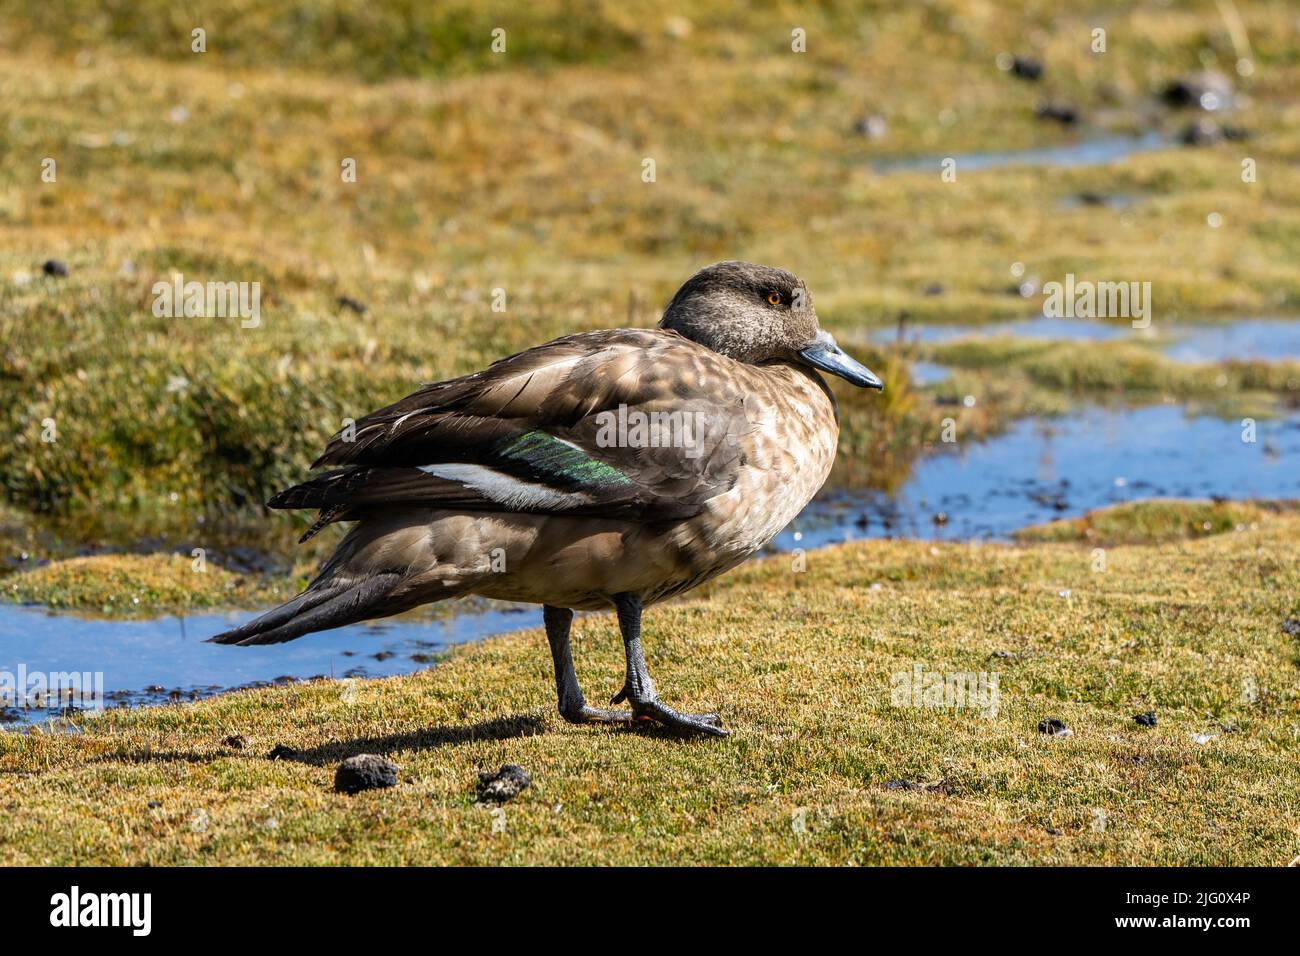 A South American Crested Duck, Lophonetta specularioides, in a wetland in Lauca National Park on the altiplano in Chile.  This is the subspecies Andea Stock Photo